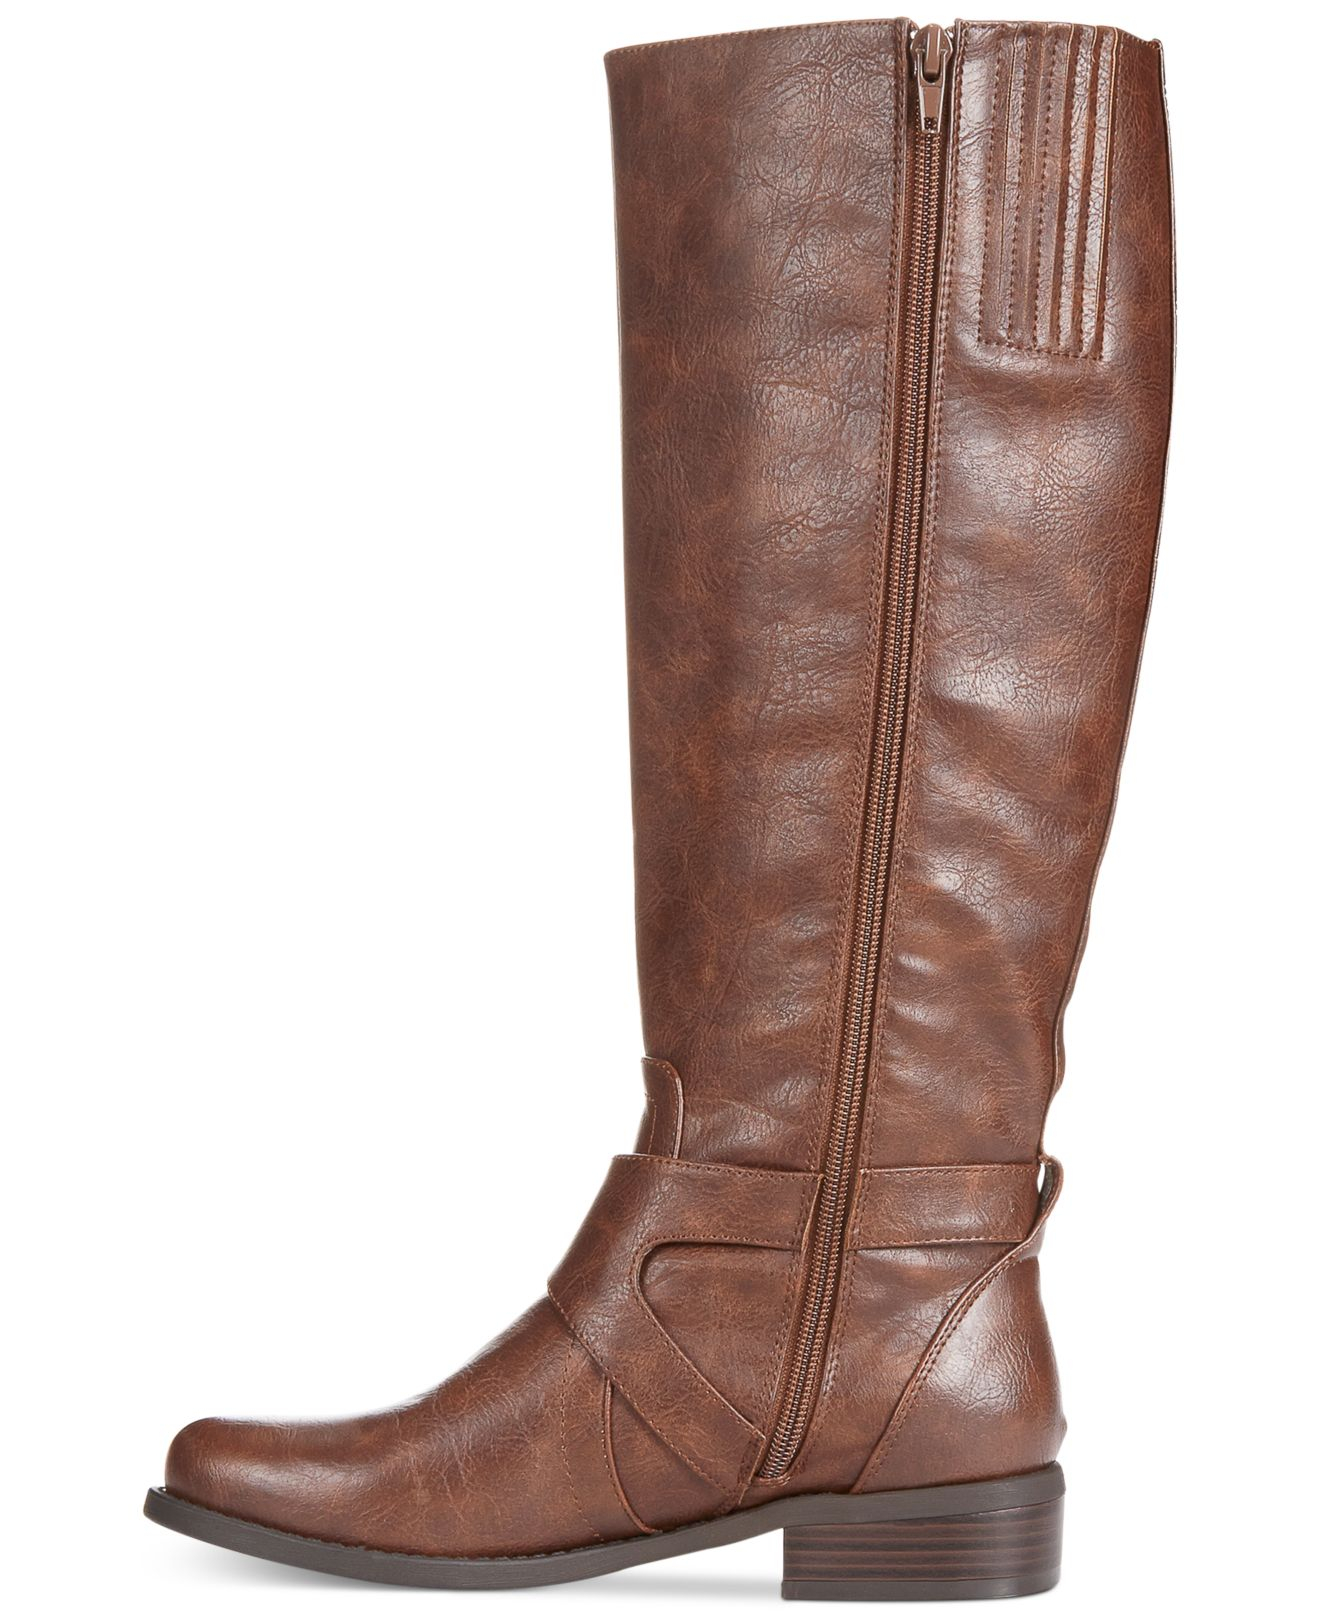 Lyst - G By Guess Women'S Hertle Tall Shaft Riding Boots in Brown